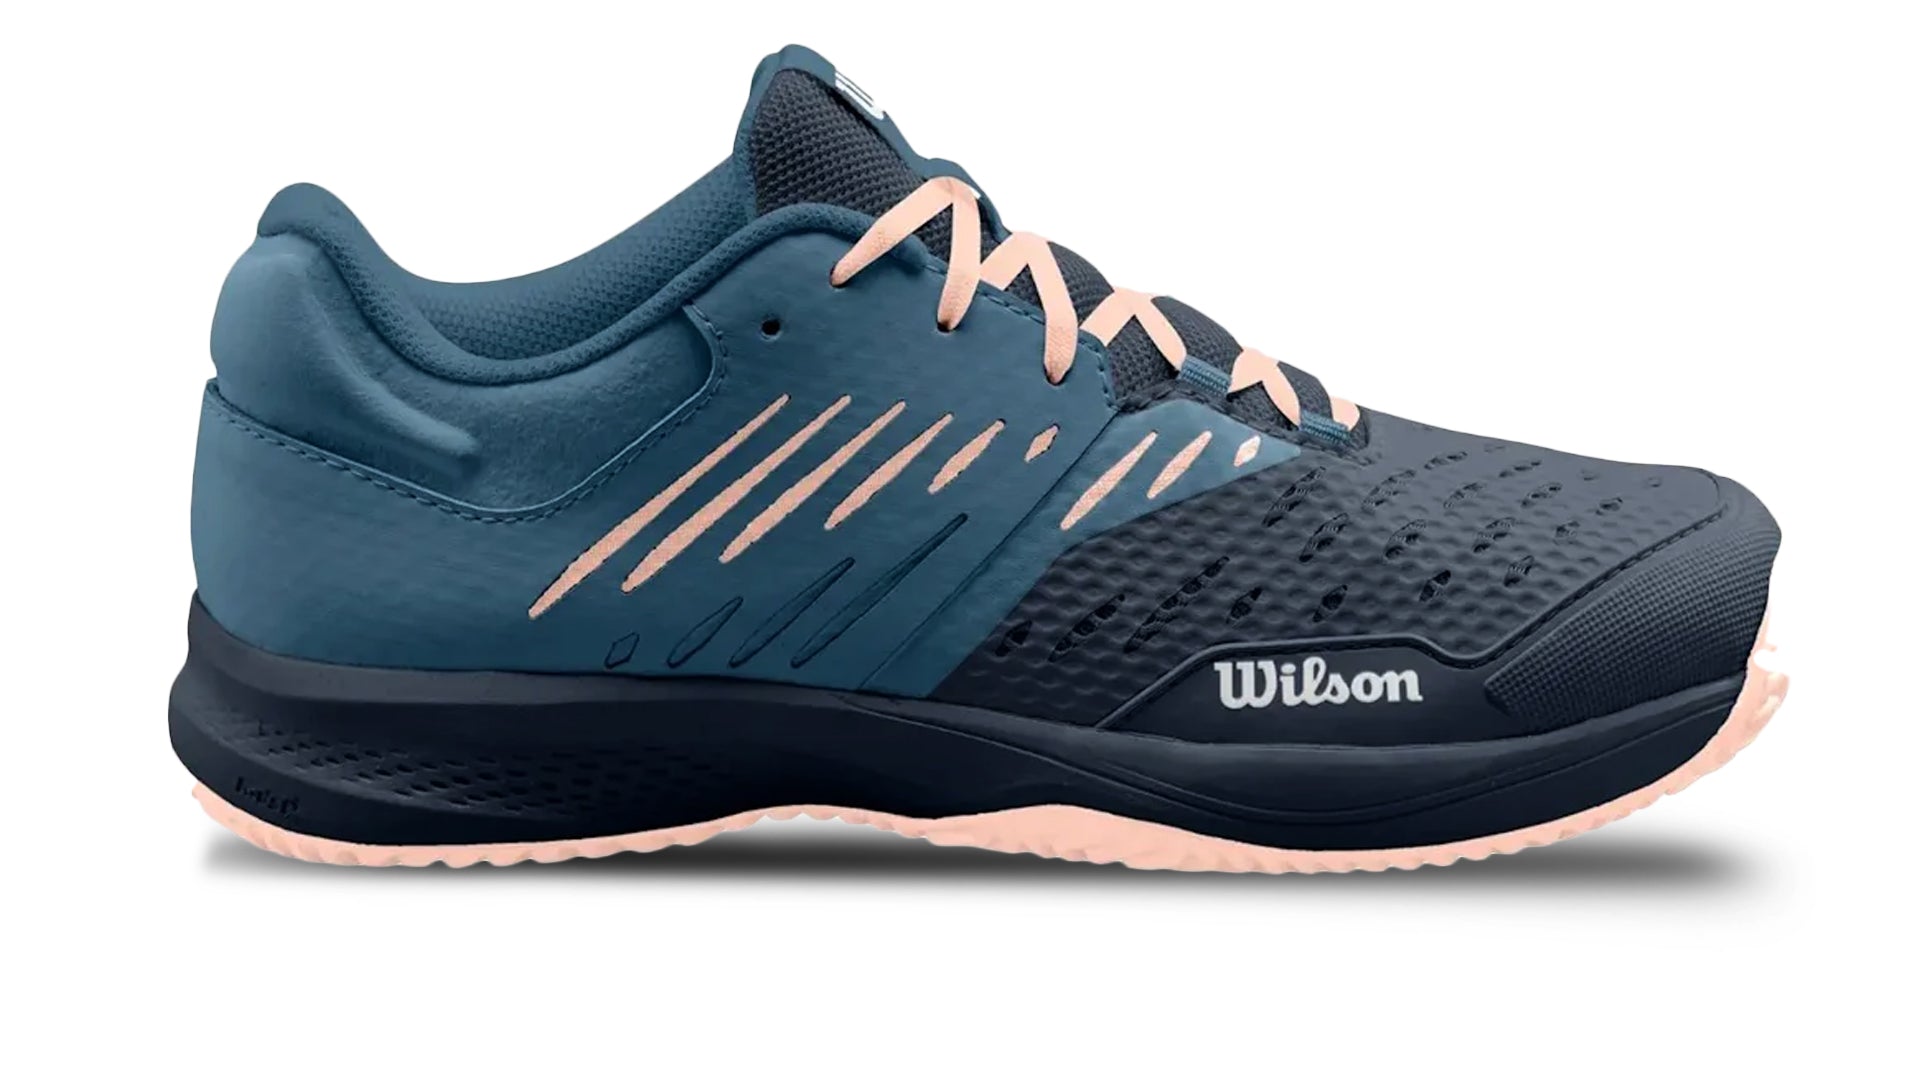 Wilson Ladies Kaos Comp 3.0 Tennis Shoe in India Ink/China Blue/Scallop Shell